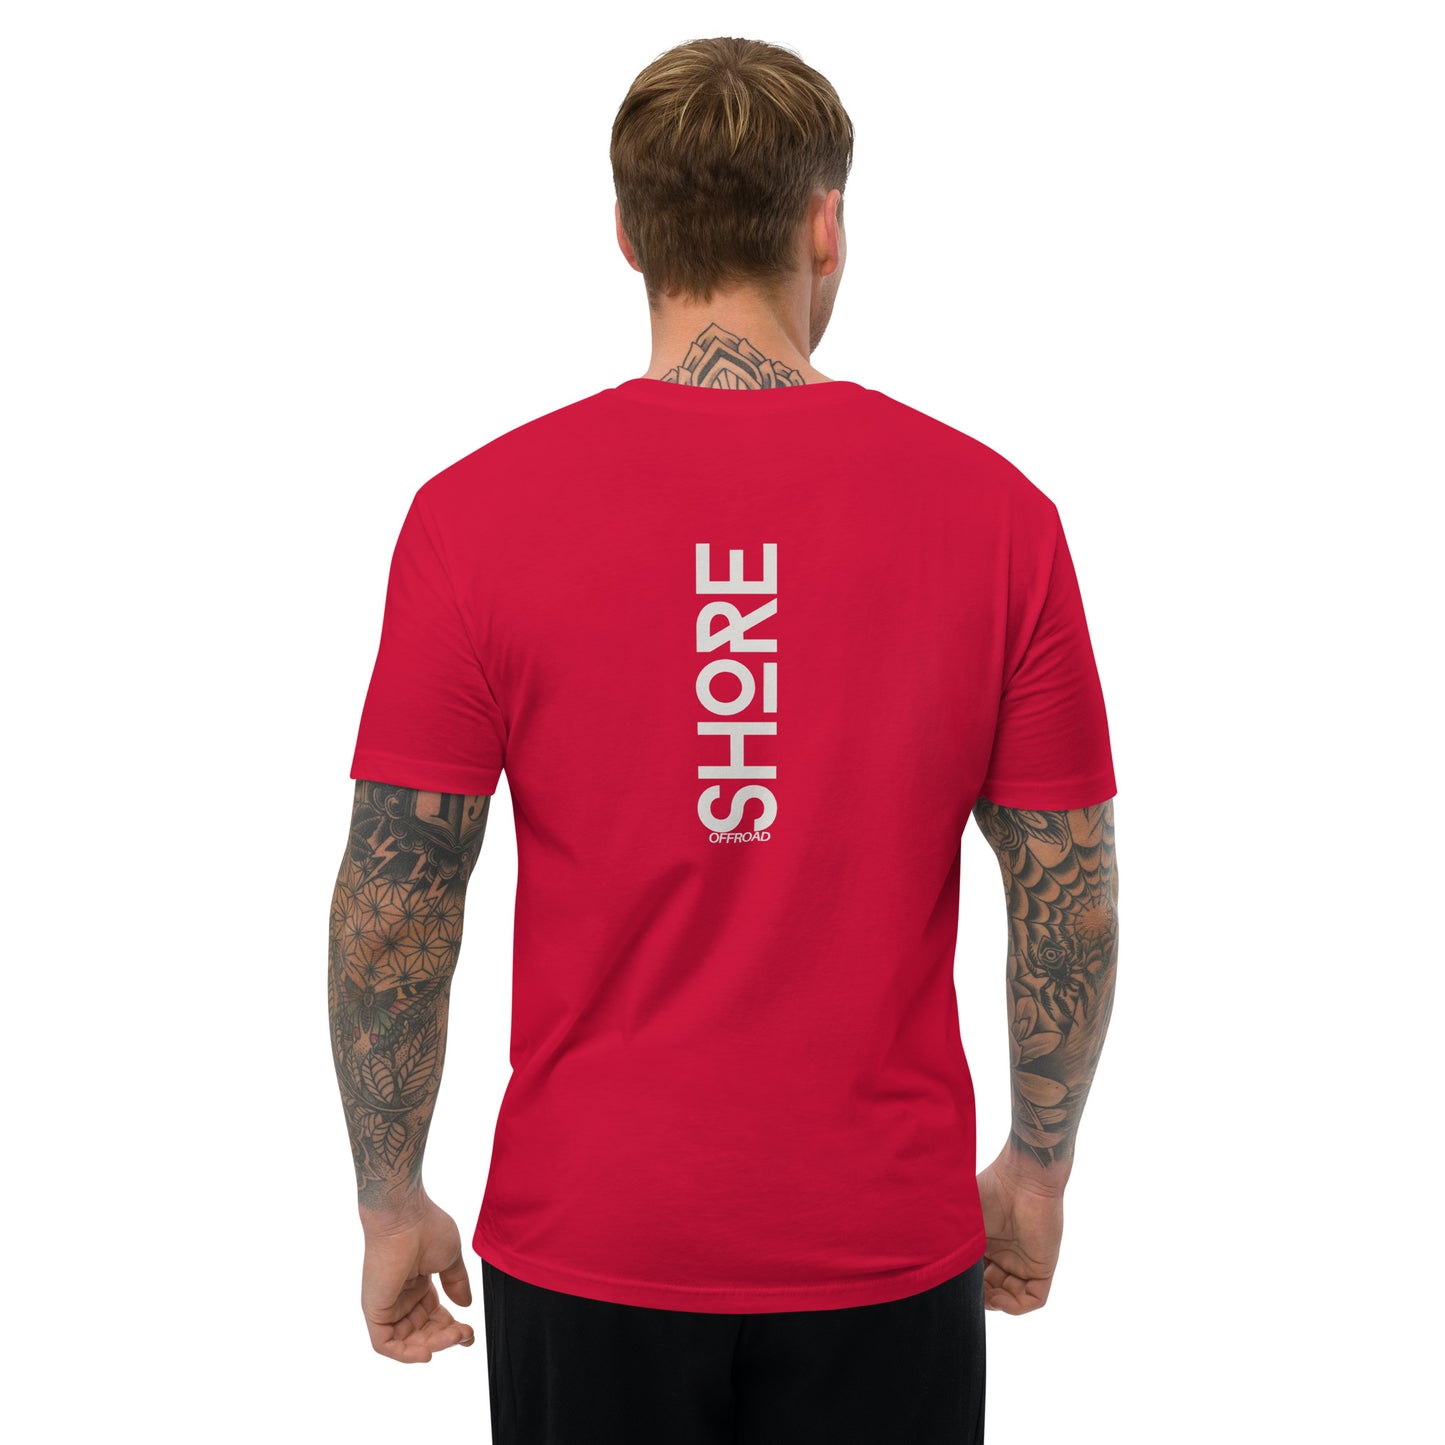 a man wearing a red shirt with the words shop on it